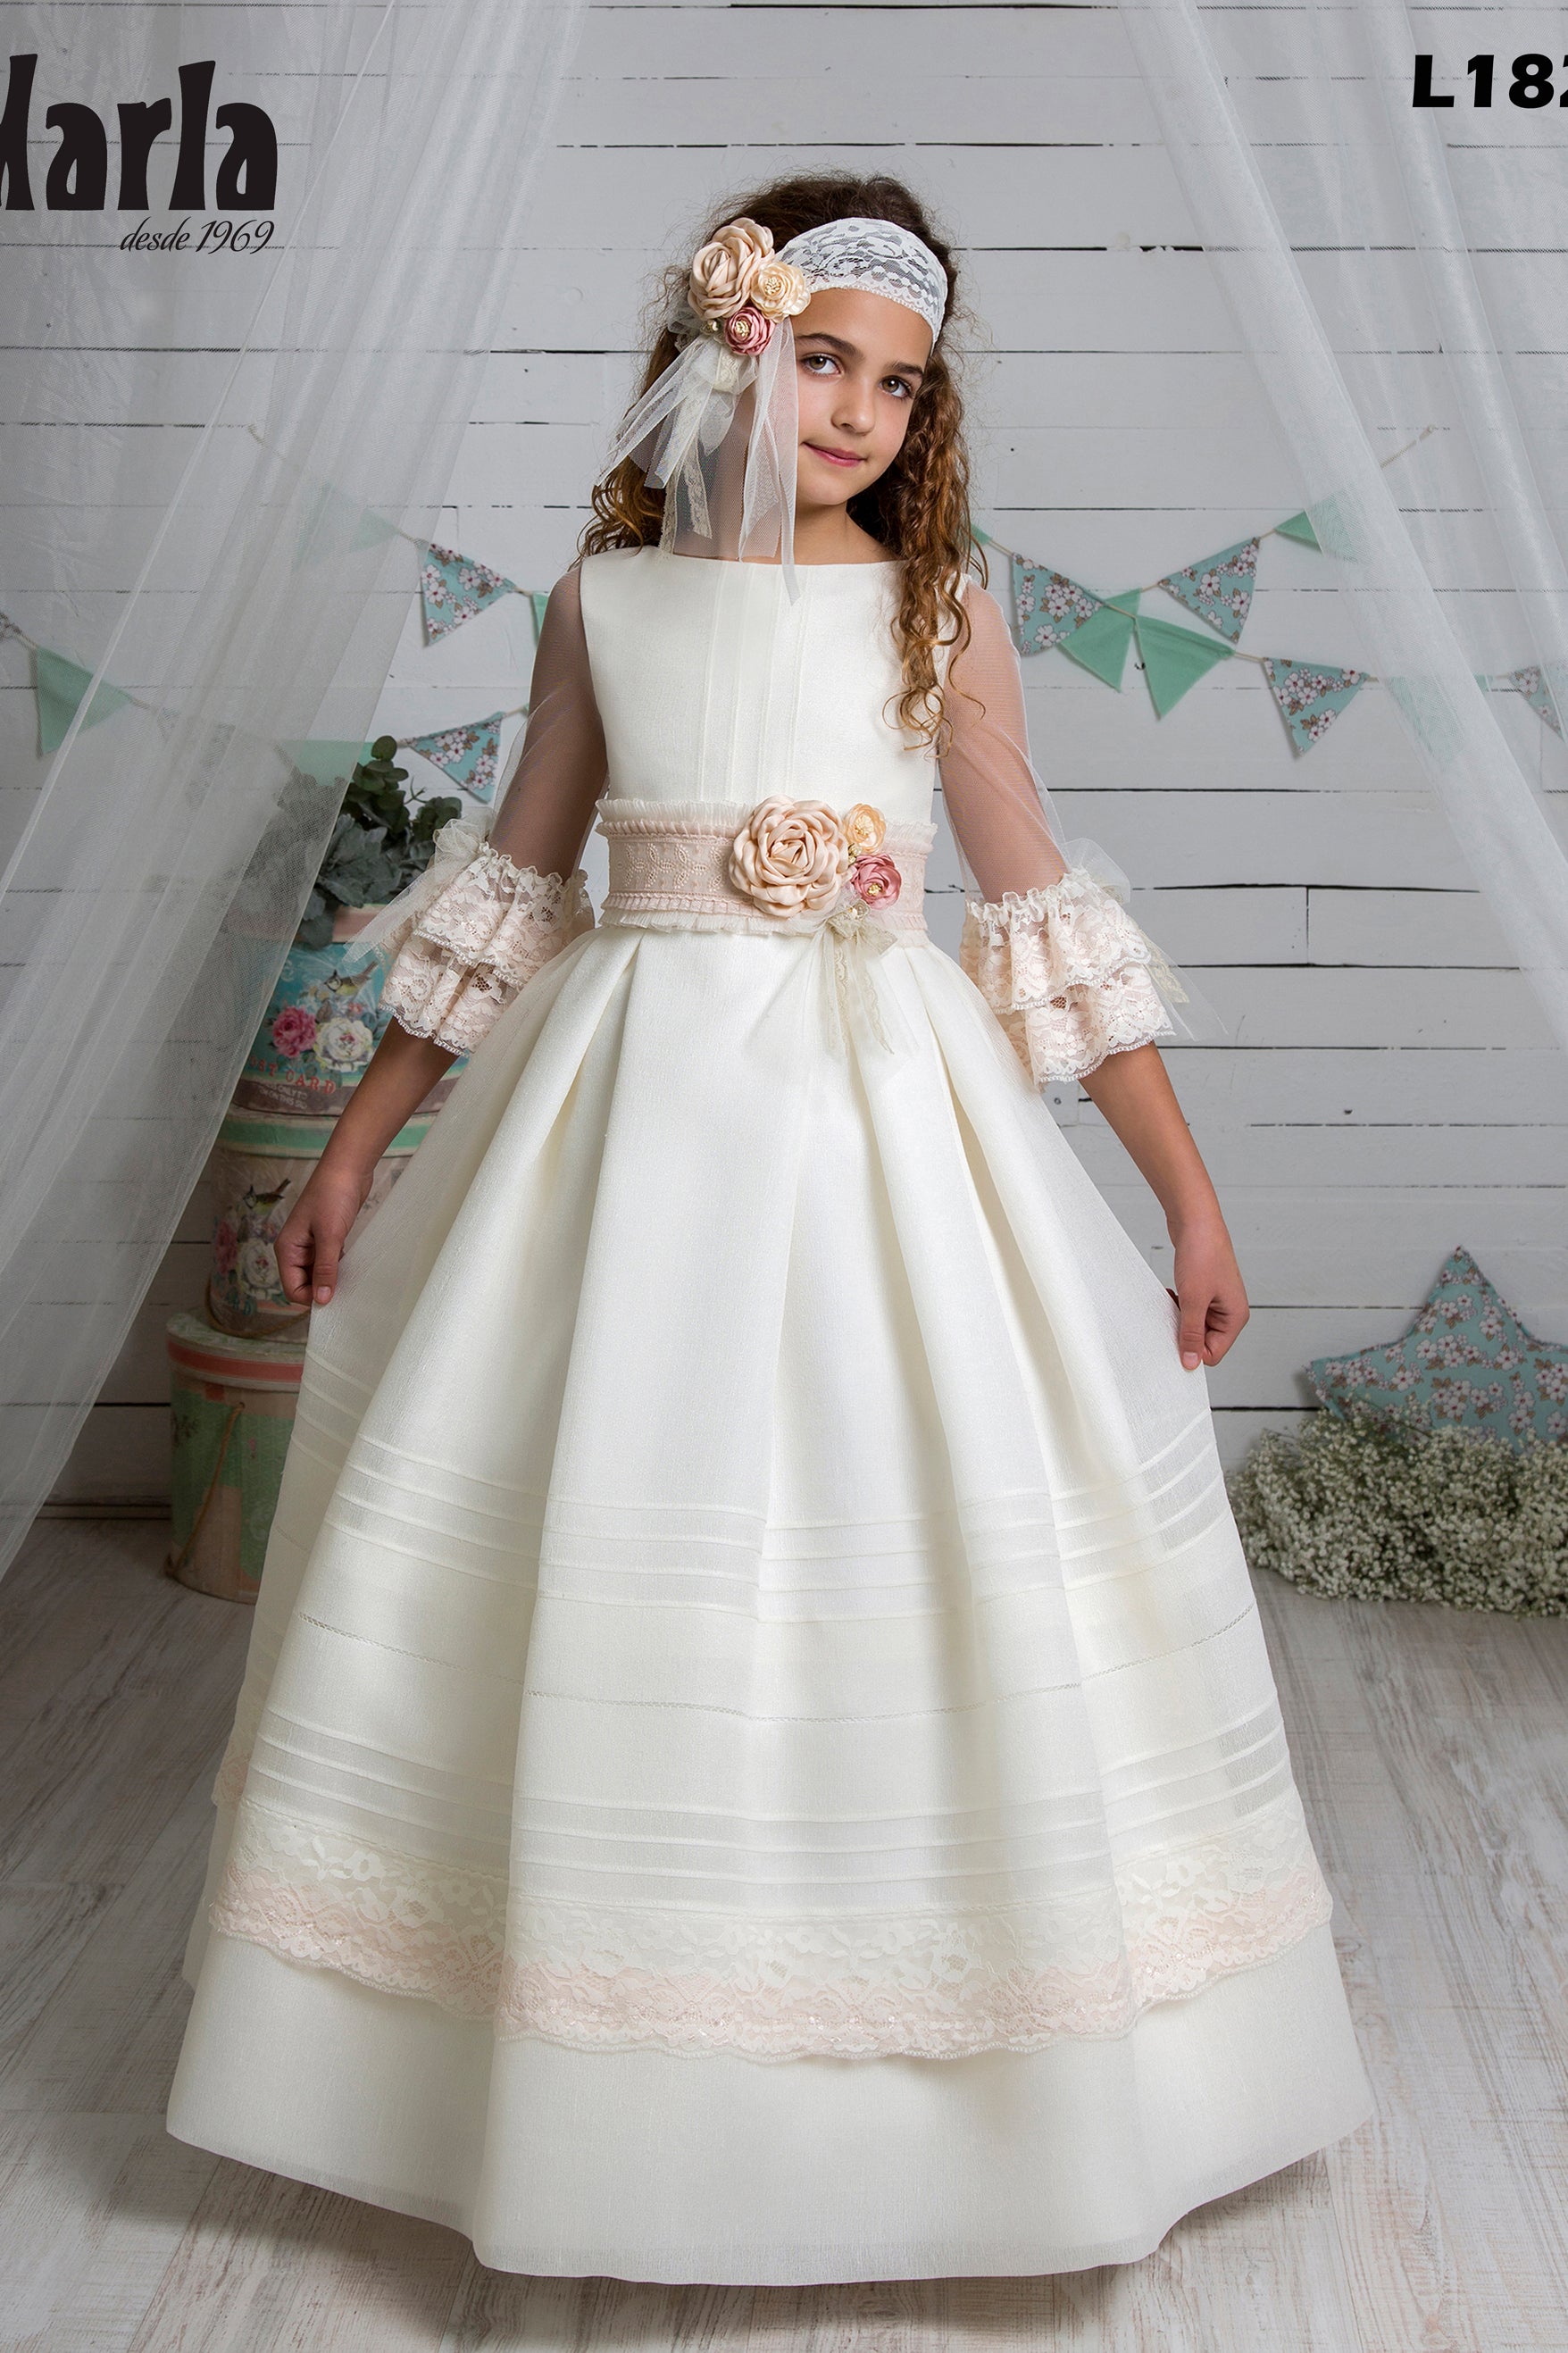 Classy Rustic Fabric Skirt French Sleeves Beige Stripes Spanish Communion Gown Marla L182 Pre-Order 7 / As in The Photo (Rose/Beige)